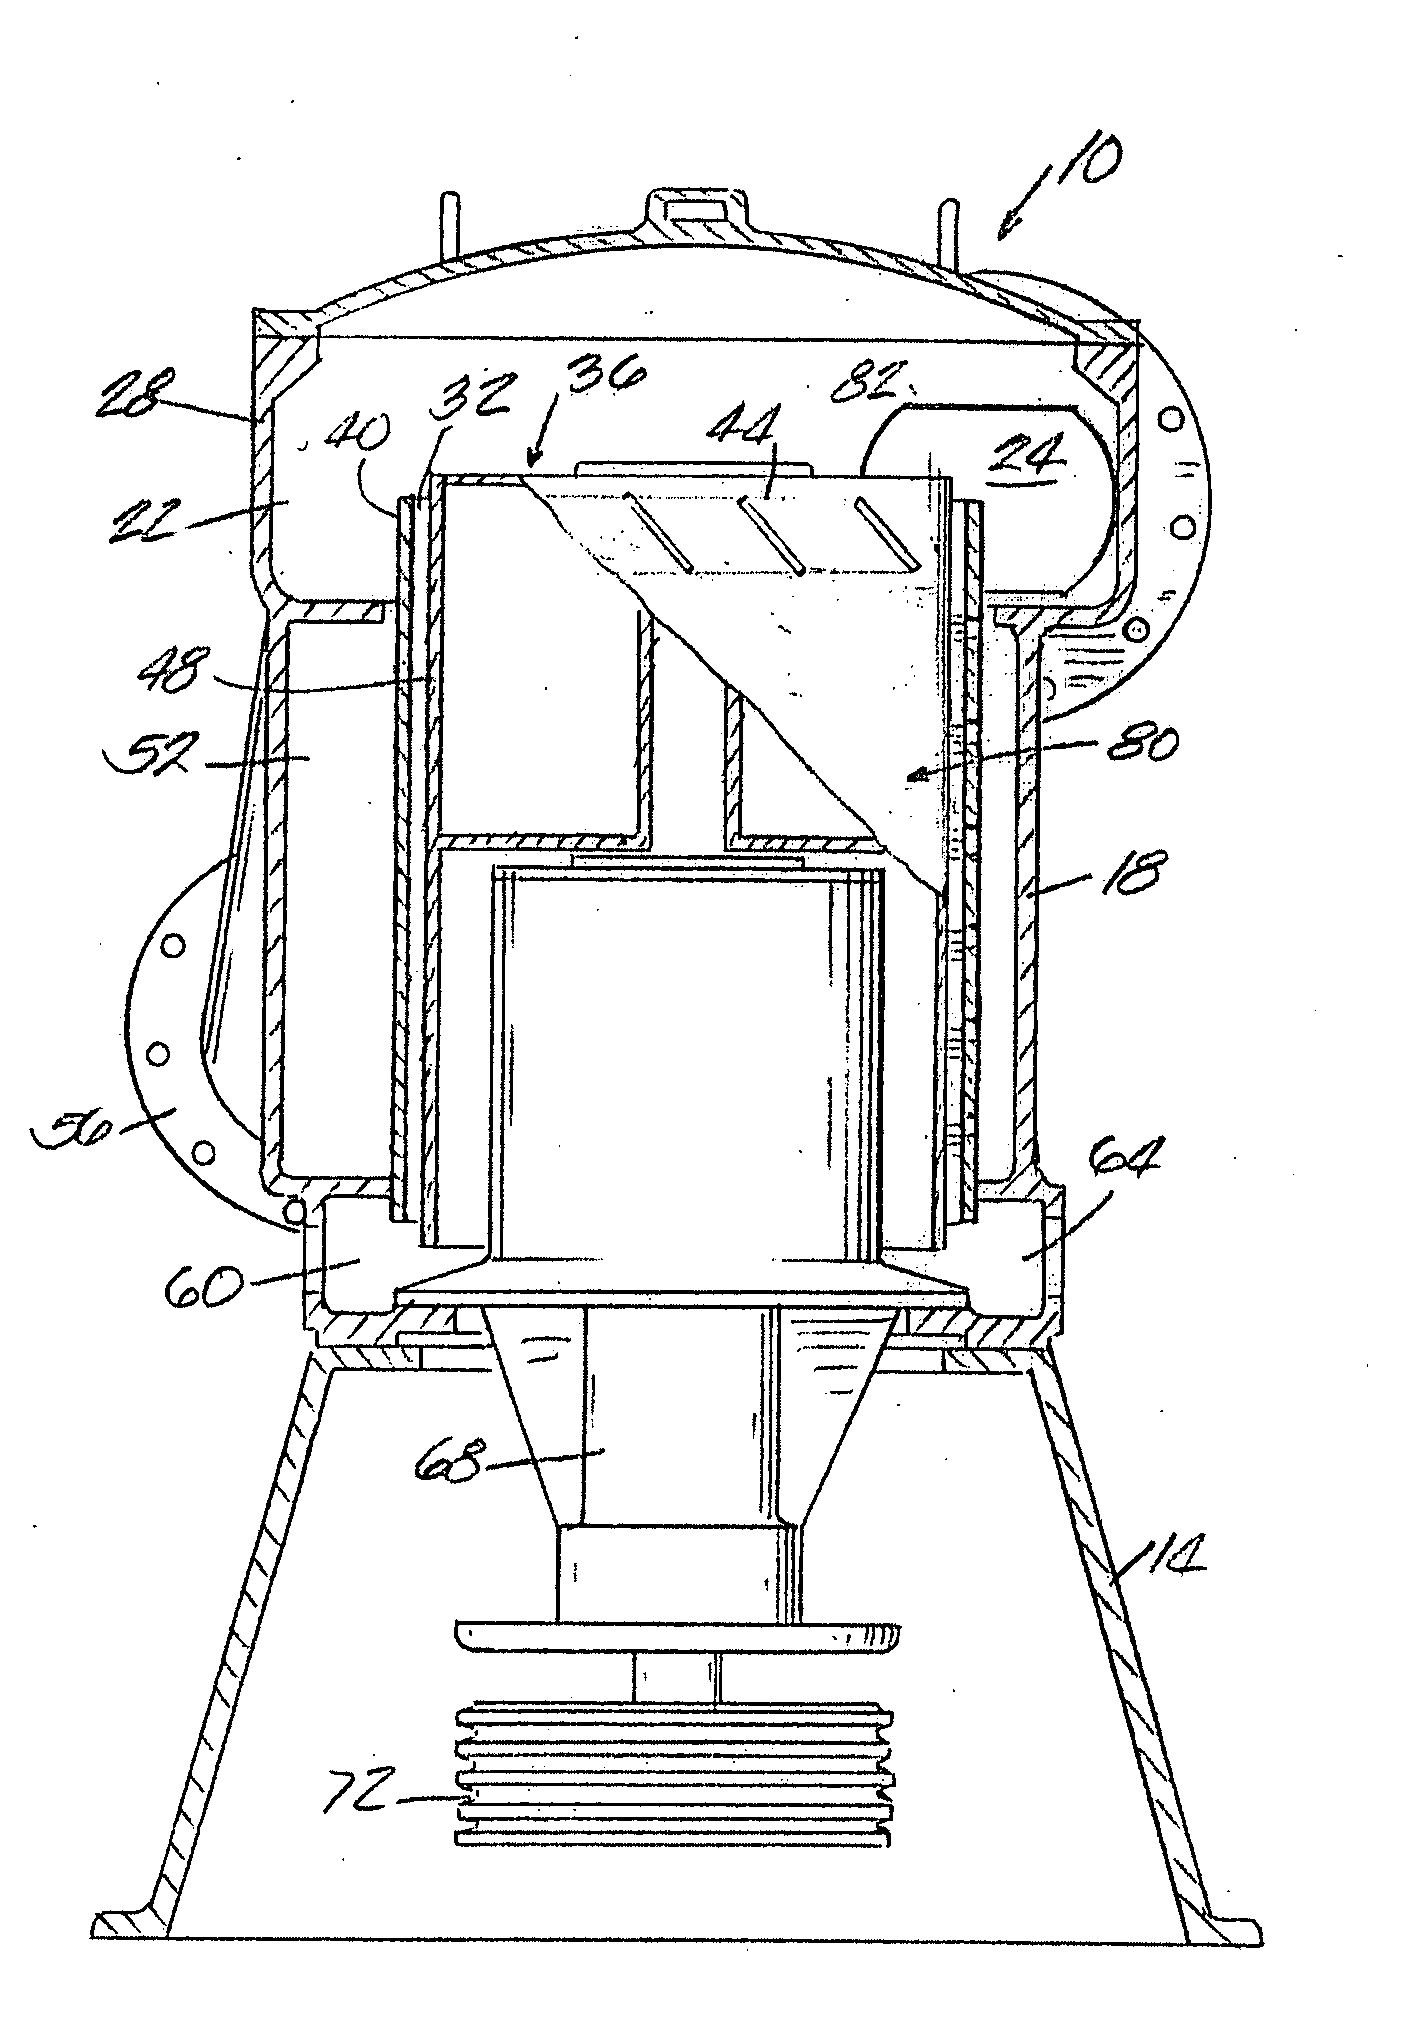 Vortex inducing rotor for screening apparatus for papermaking pulp